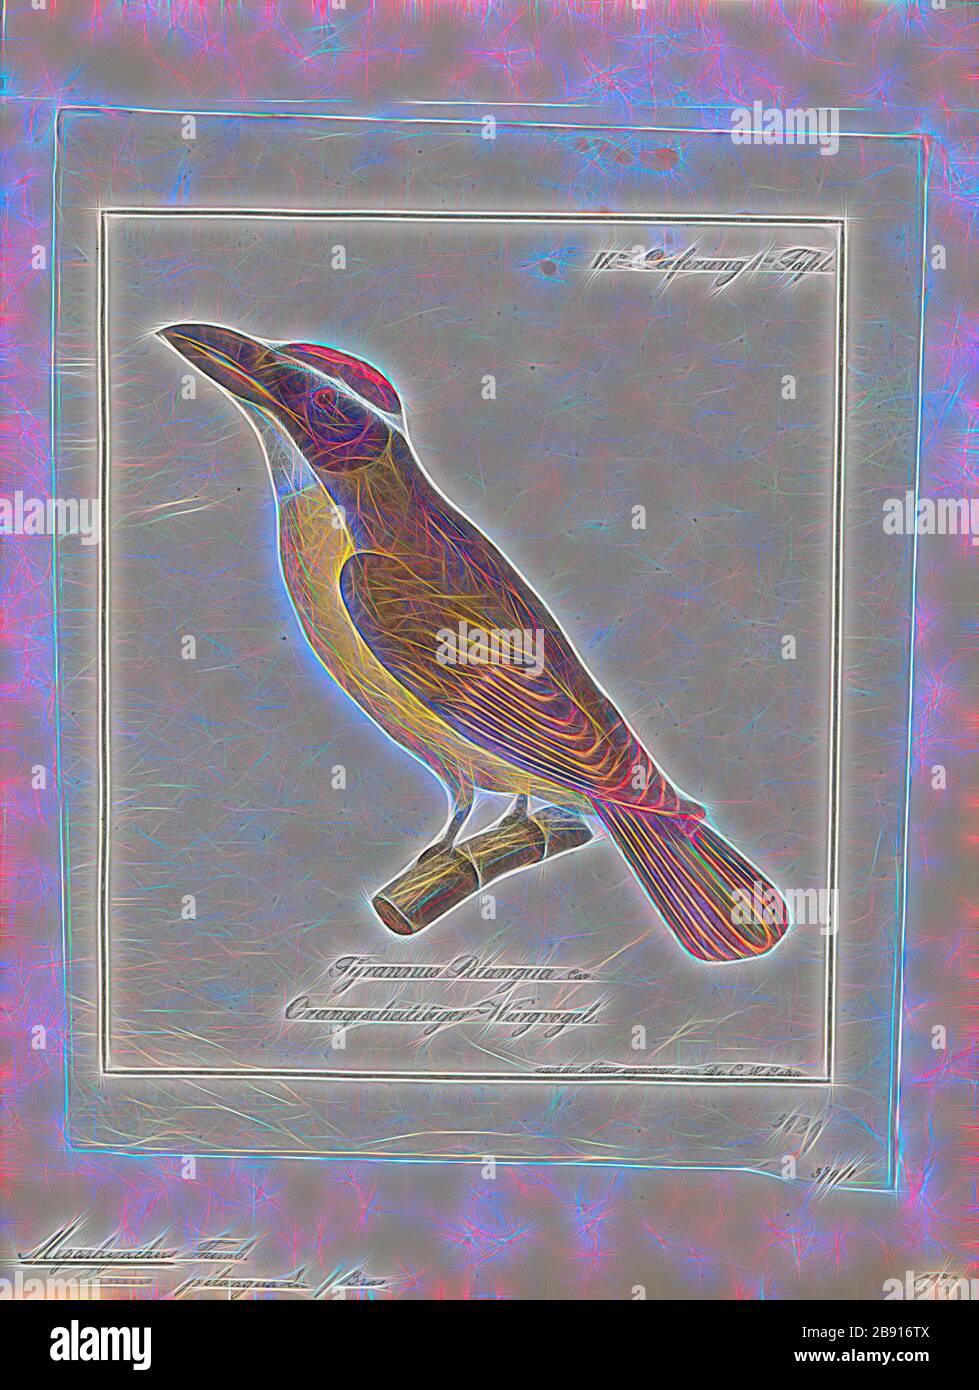 Megarhynchus pitangua, Print, The boat-billed flycatcher (Megarynchus pitangua) is a passerine bird. It is a large tyrant flycatcher, the only member of the monotypic genus Megarynchus., 1700-1880, Reimagined by Gibon, design of warm cheerful glowing of brightness and light rays radiance. Classic art reinvented with a modern twist. Photography inspired by futurism, embracing dynamic energy of modern technology, movement, speed and revolutionize culture. Stock Photo